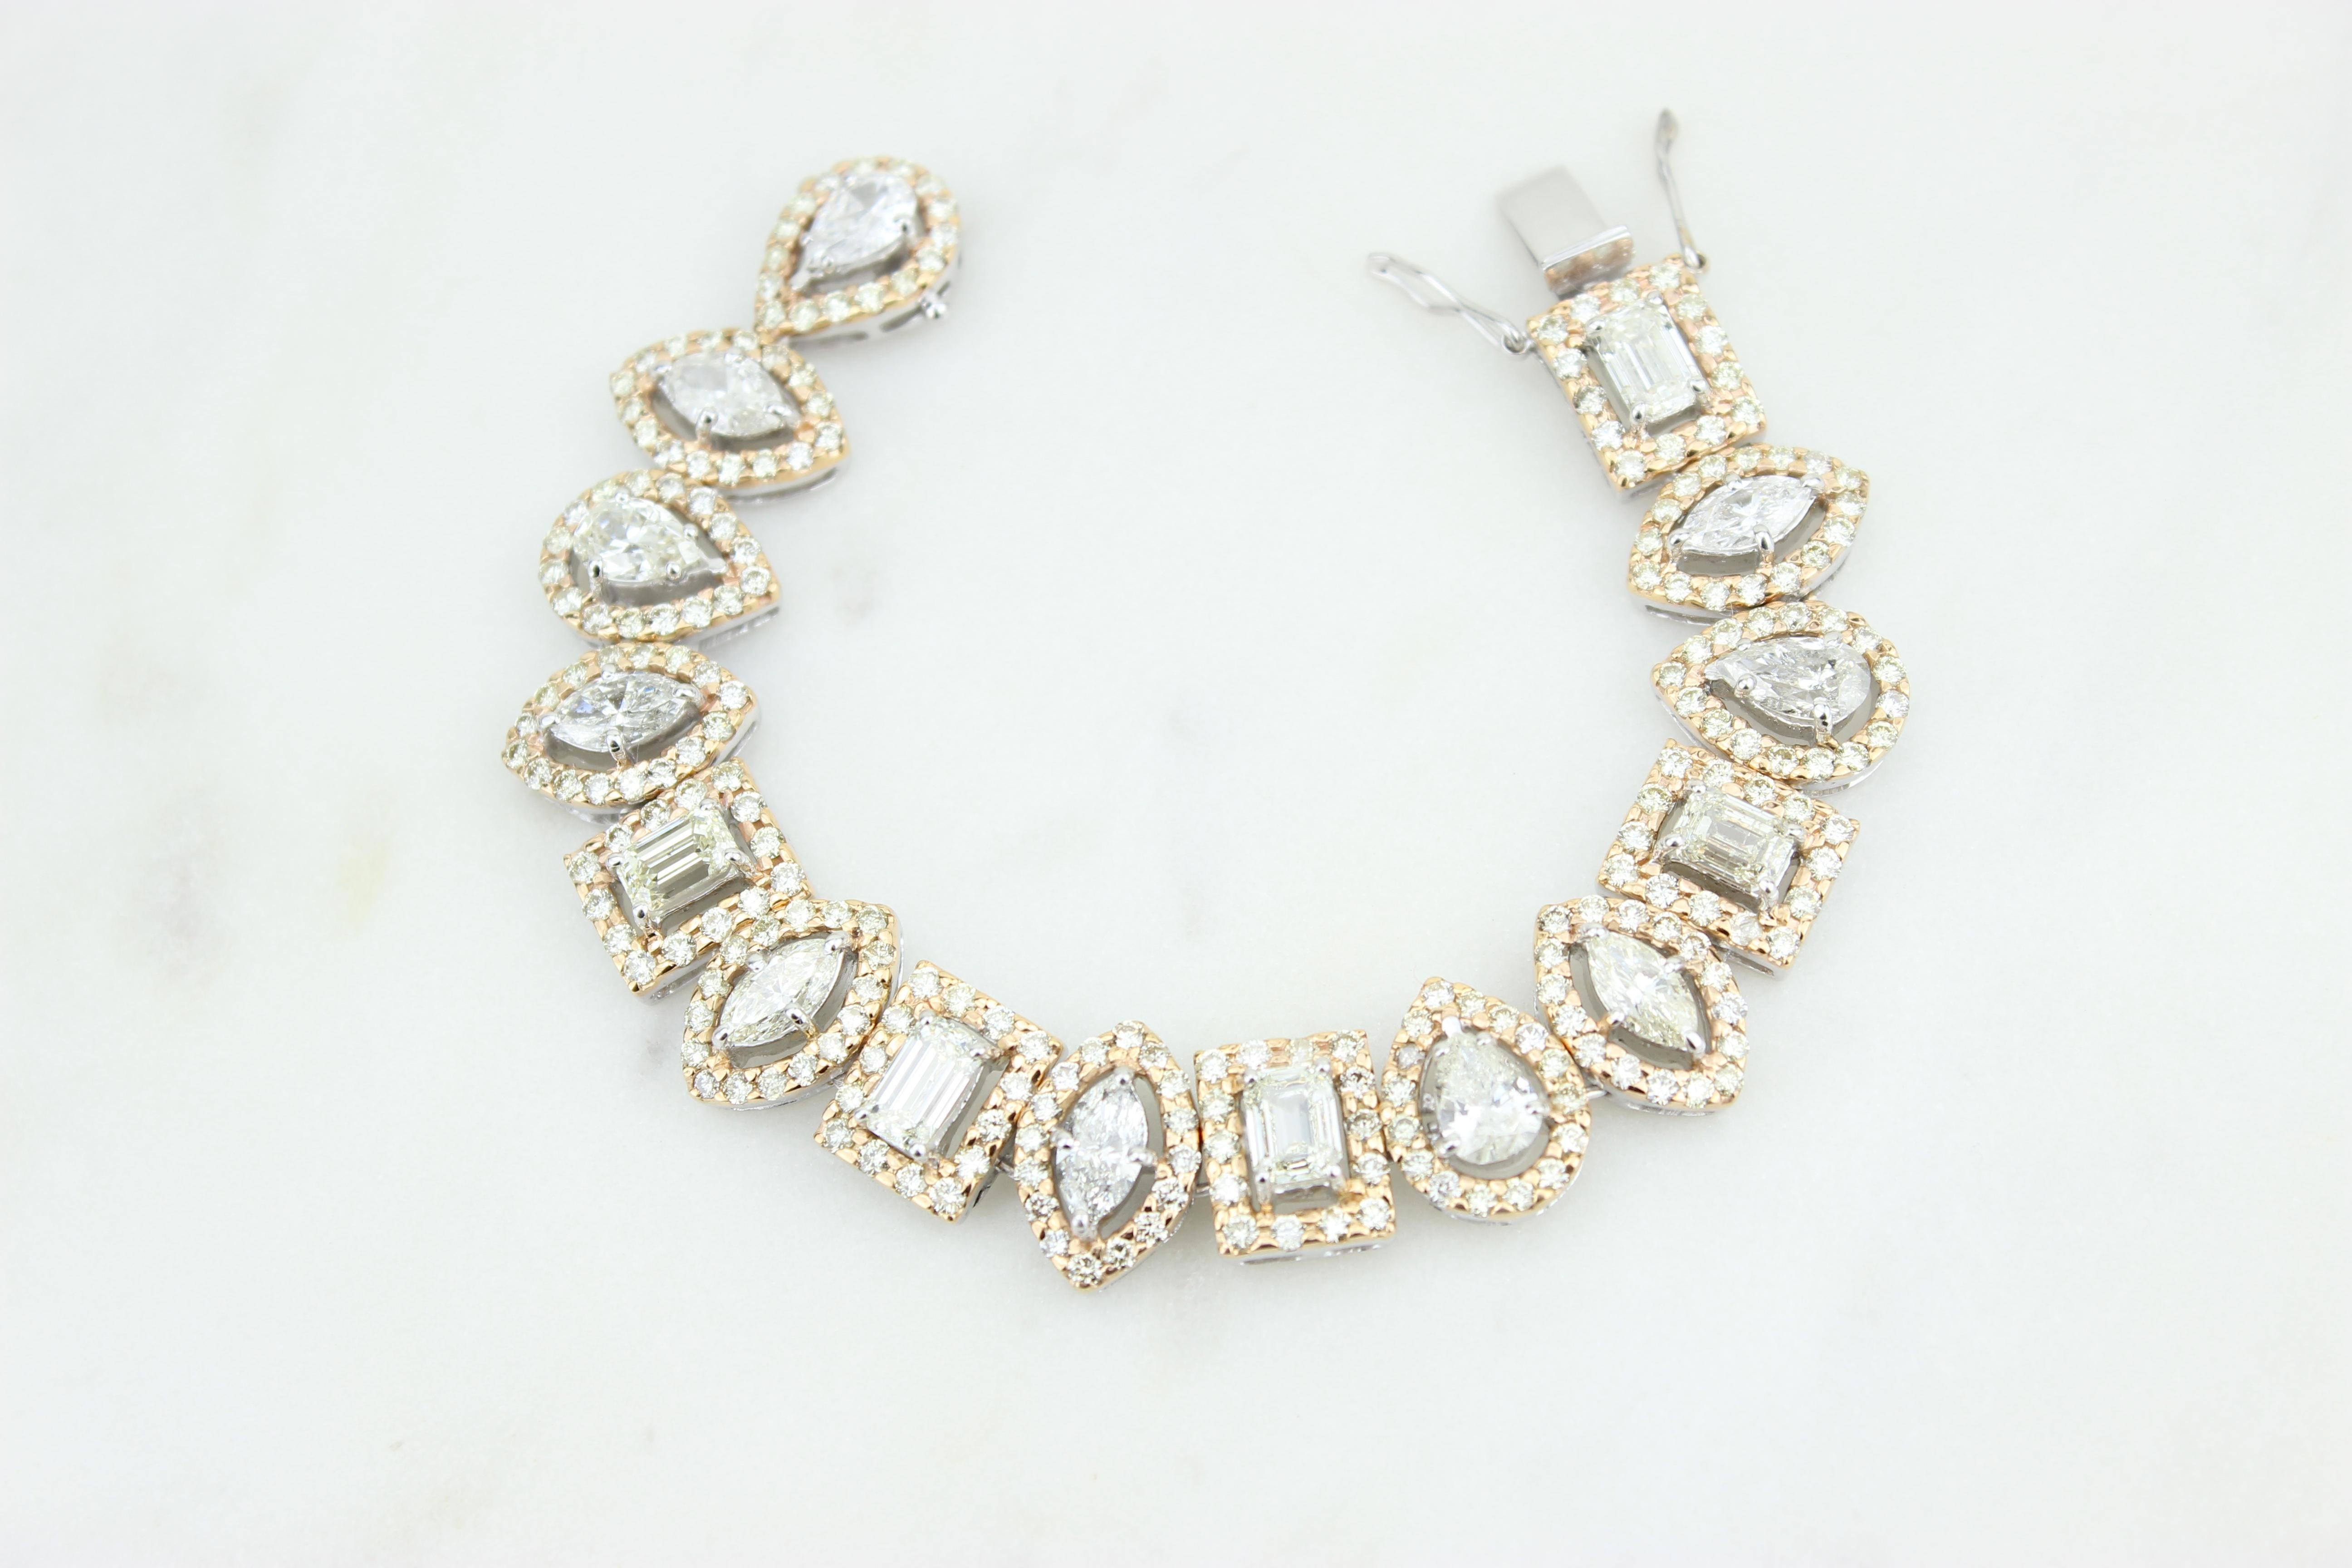 Features marquise, pear & emerald cut diamonds. Made with the highest quality natural diamonds on a 100% guaranteed 18k solid gold. 

THE STONES-
This bracelet consists of  pear, marquise & emerald cut diamonds shaped natural diamonds (average size